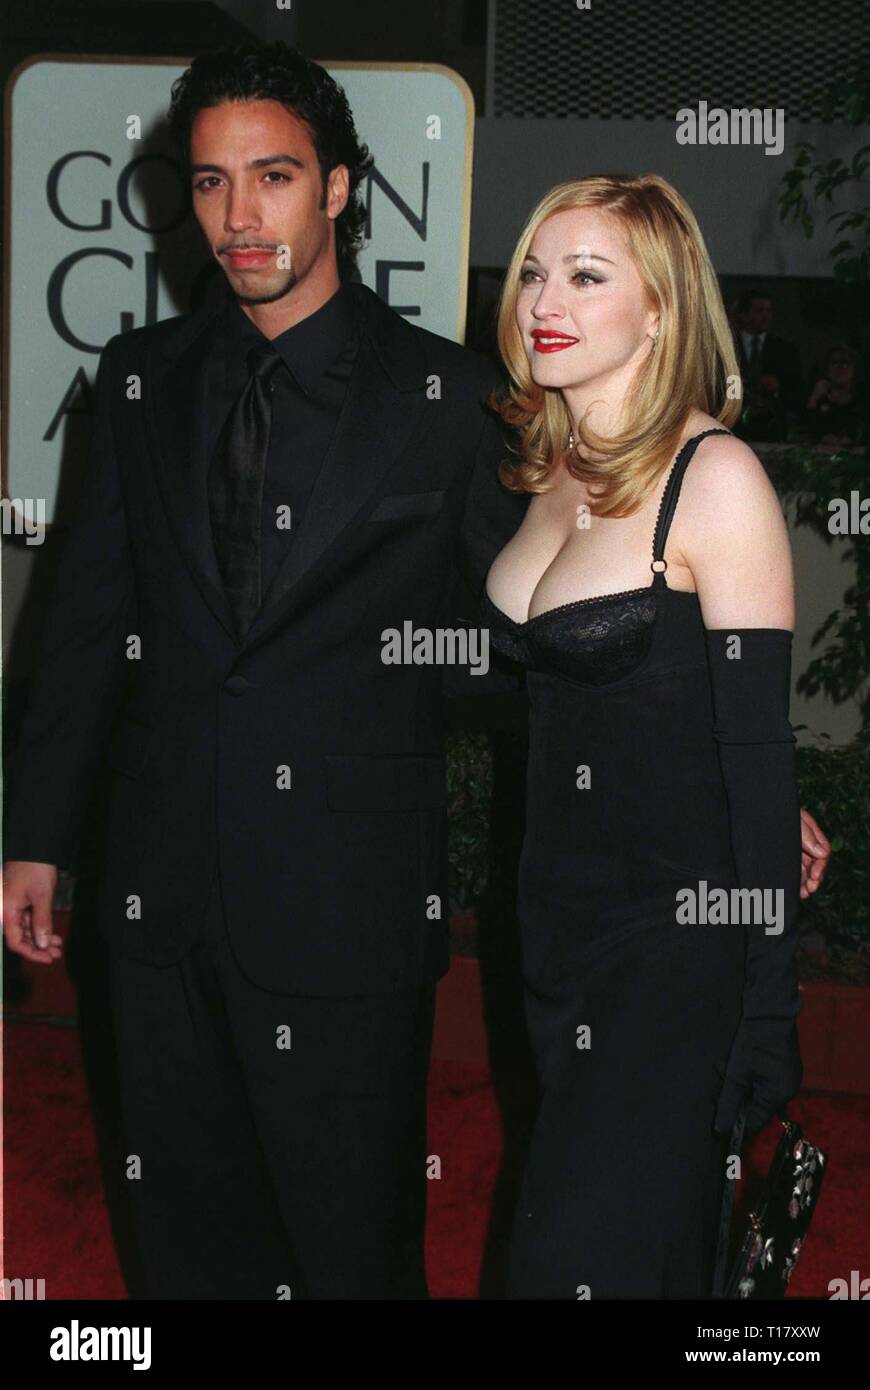 LOS ANGELES, CA. January 19, 1997: Actress/singer Madonna with boyfriend Carlos Leon at the Golden Globe Awards where she won Best Actress in a Musical or Comedy for 'Evita.' Stock Photo